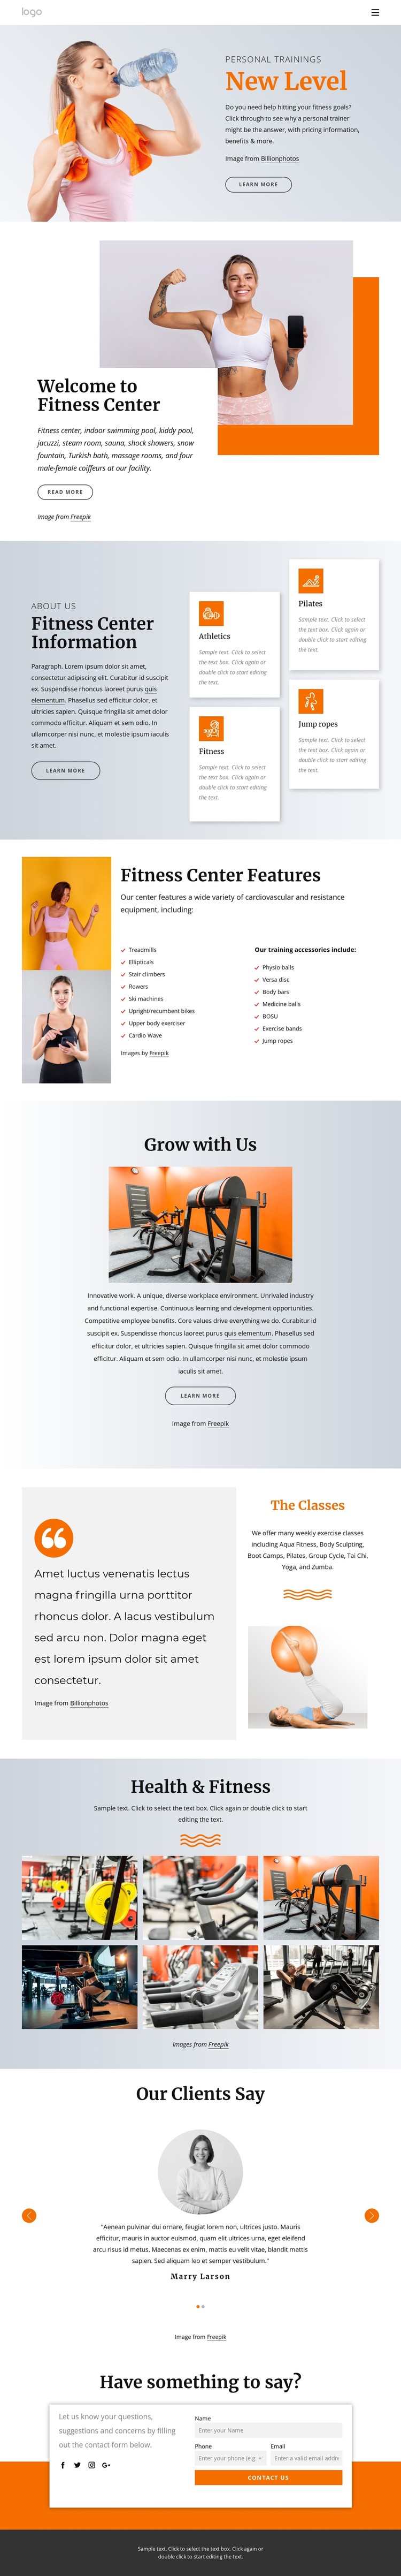 24 hour fitness center CSS Template